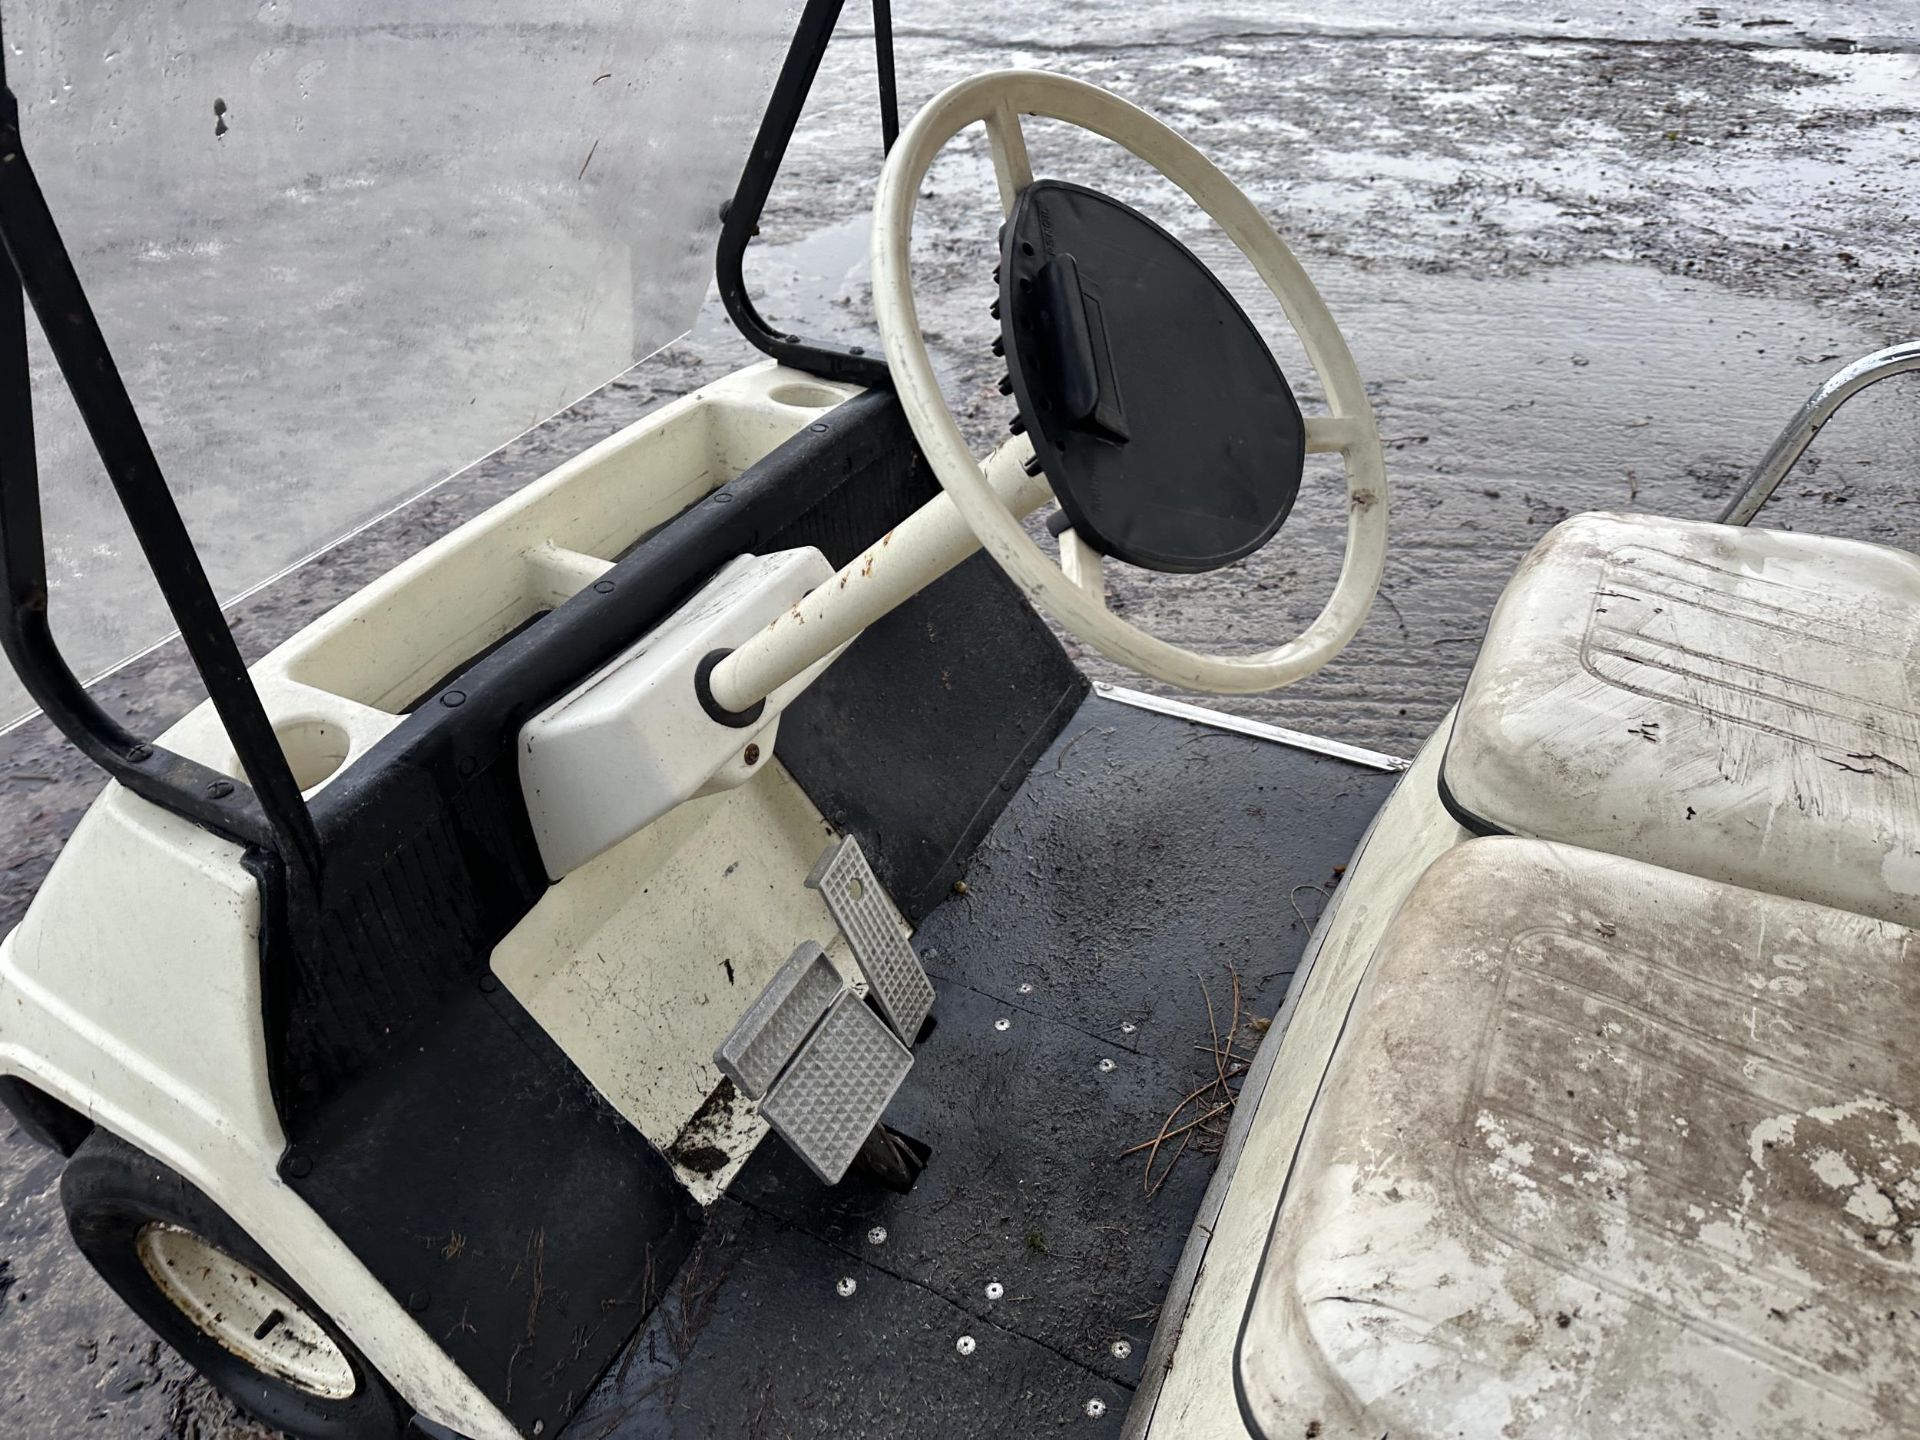 A WHITE YAMAHA ELECTRIC GOLF BUGGY COMPLETE WITH KEY - Image 5 of 6